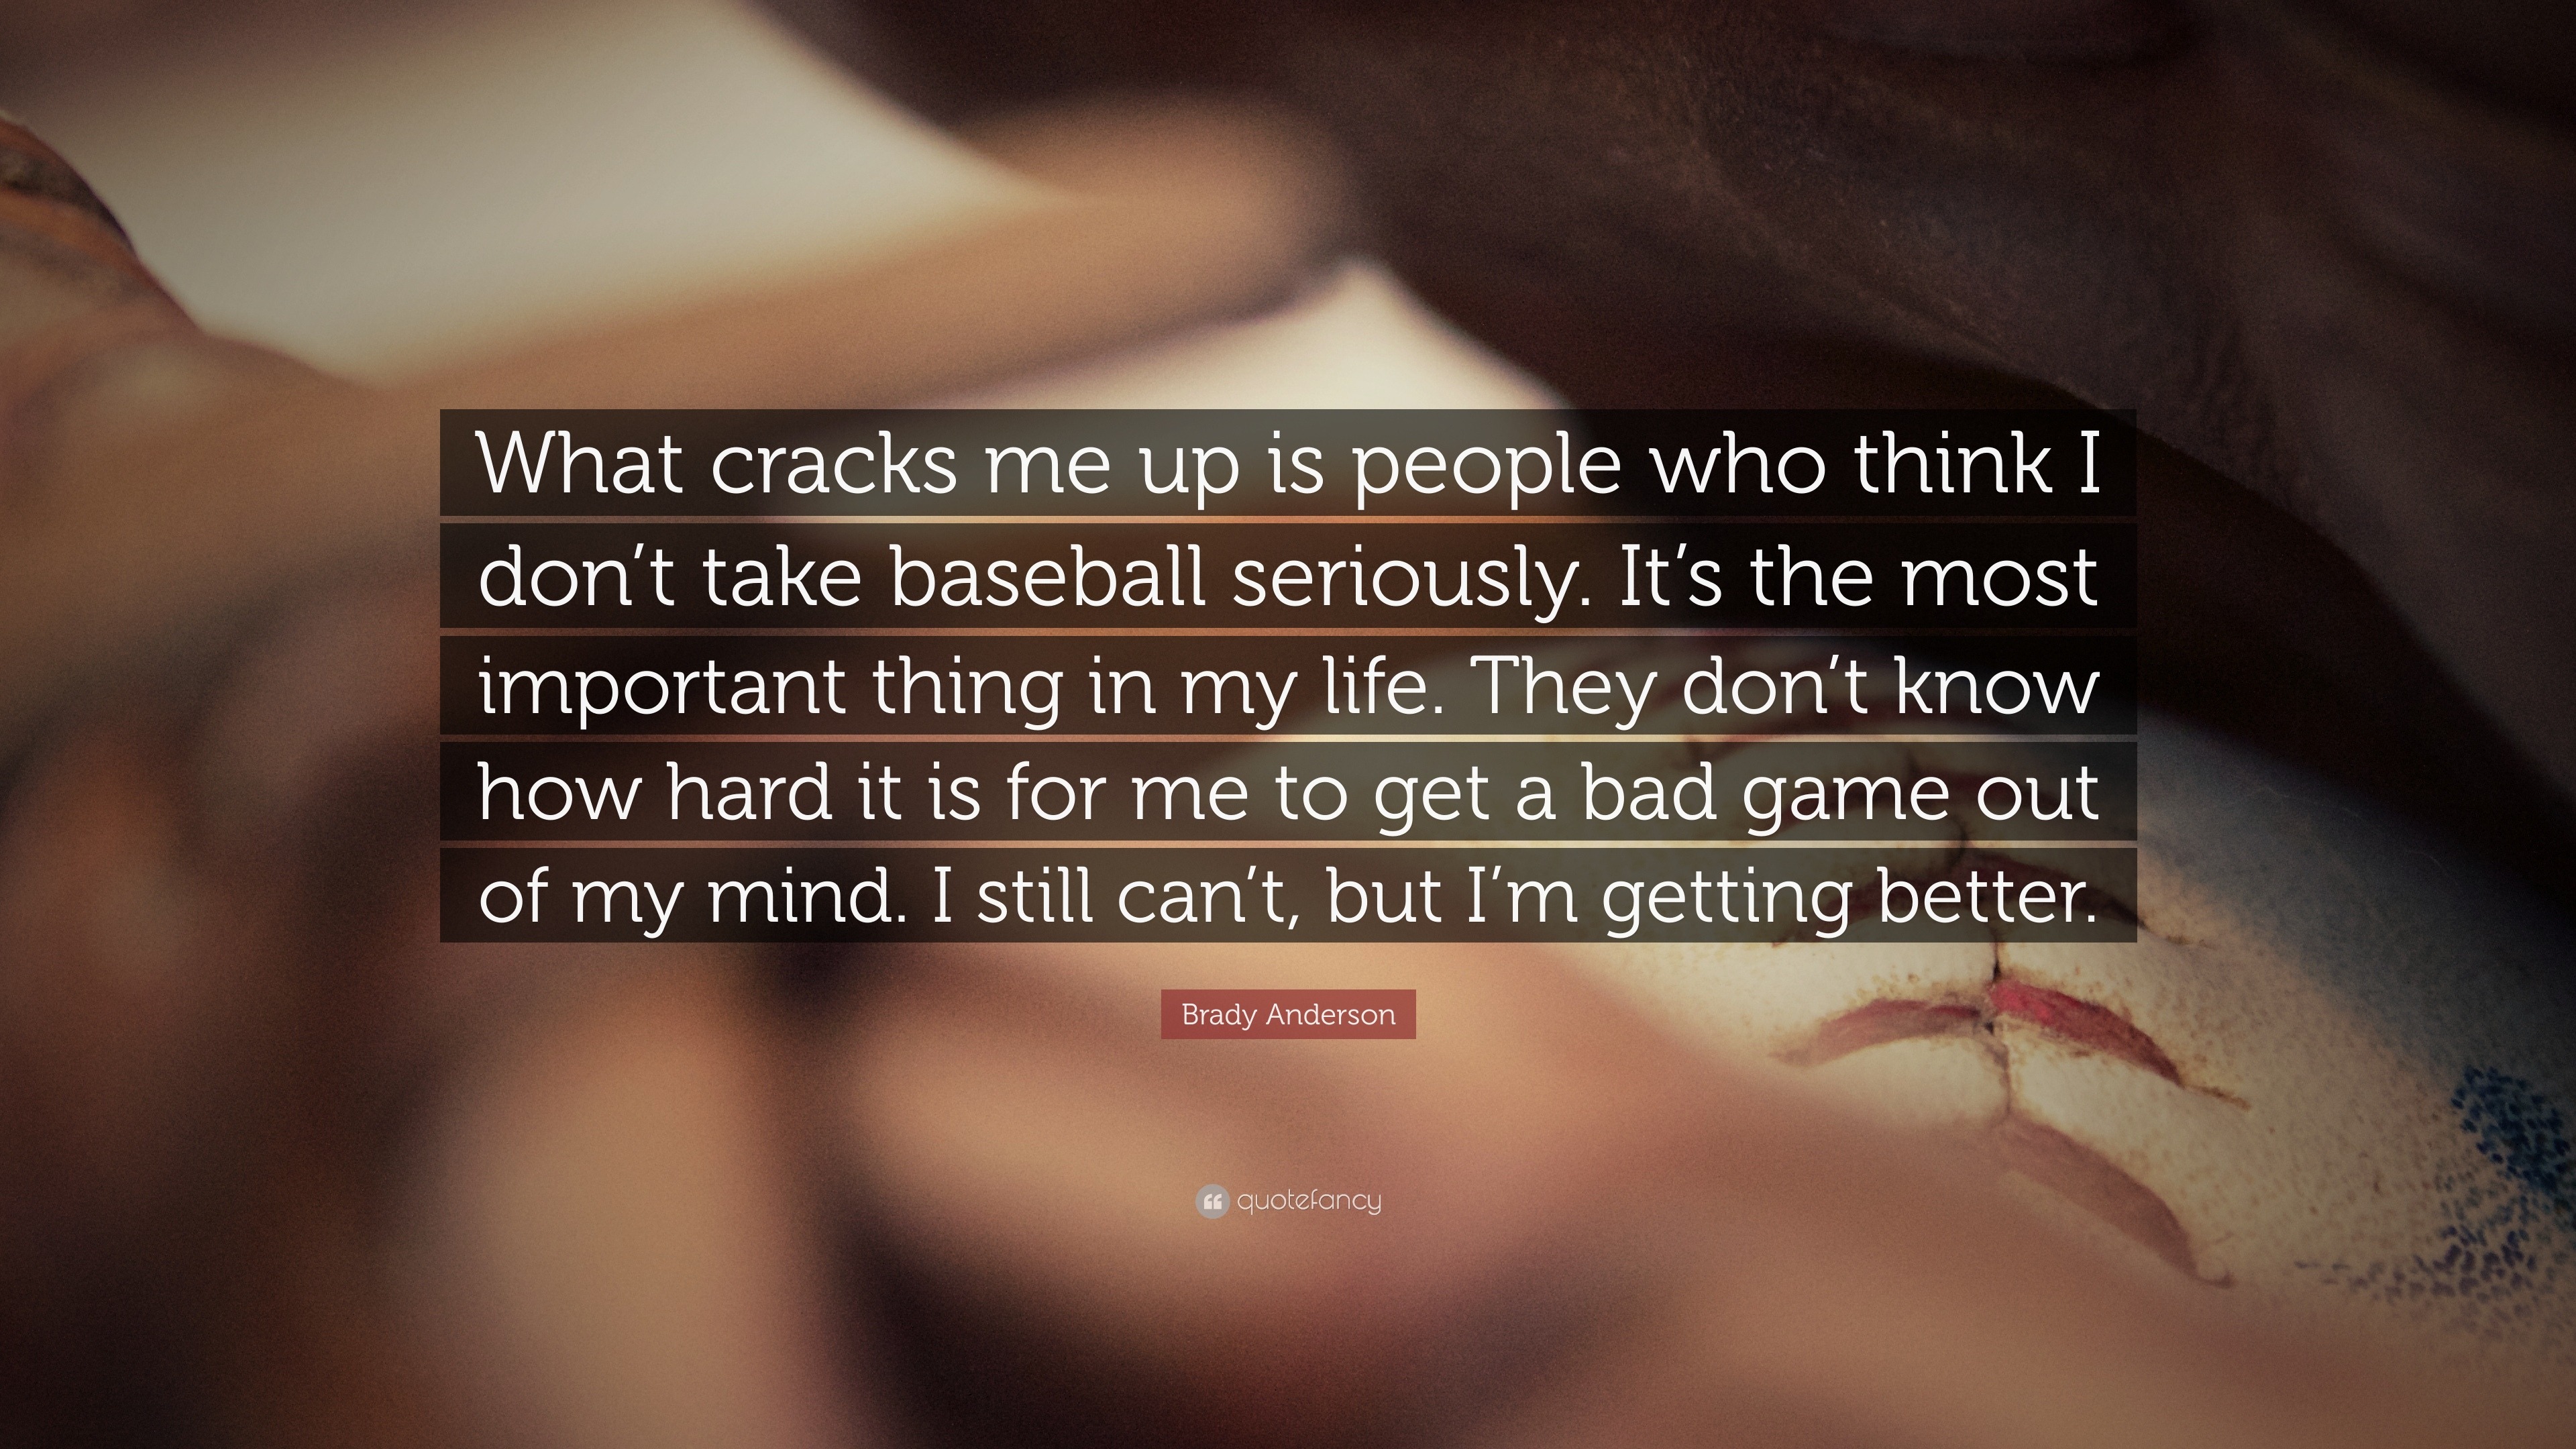 Brady Anderson Quote “What cracks me up is people who think I don